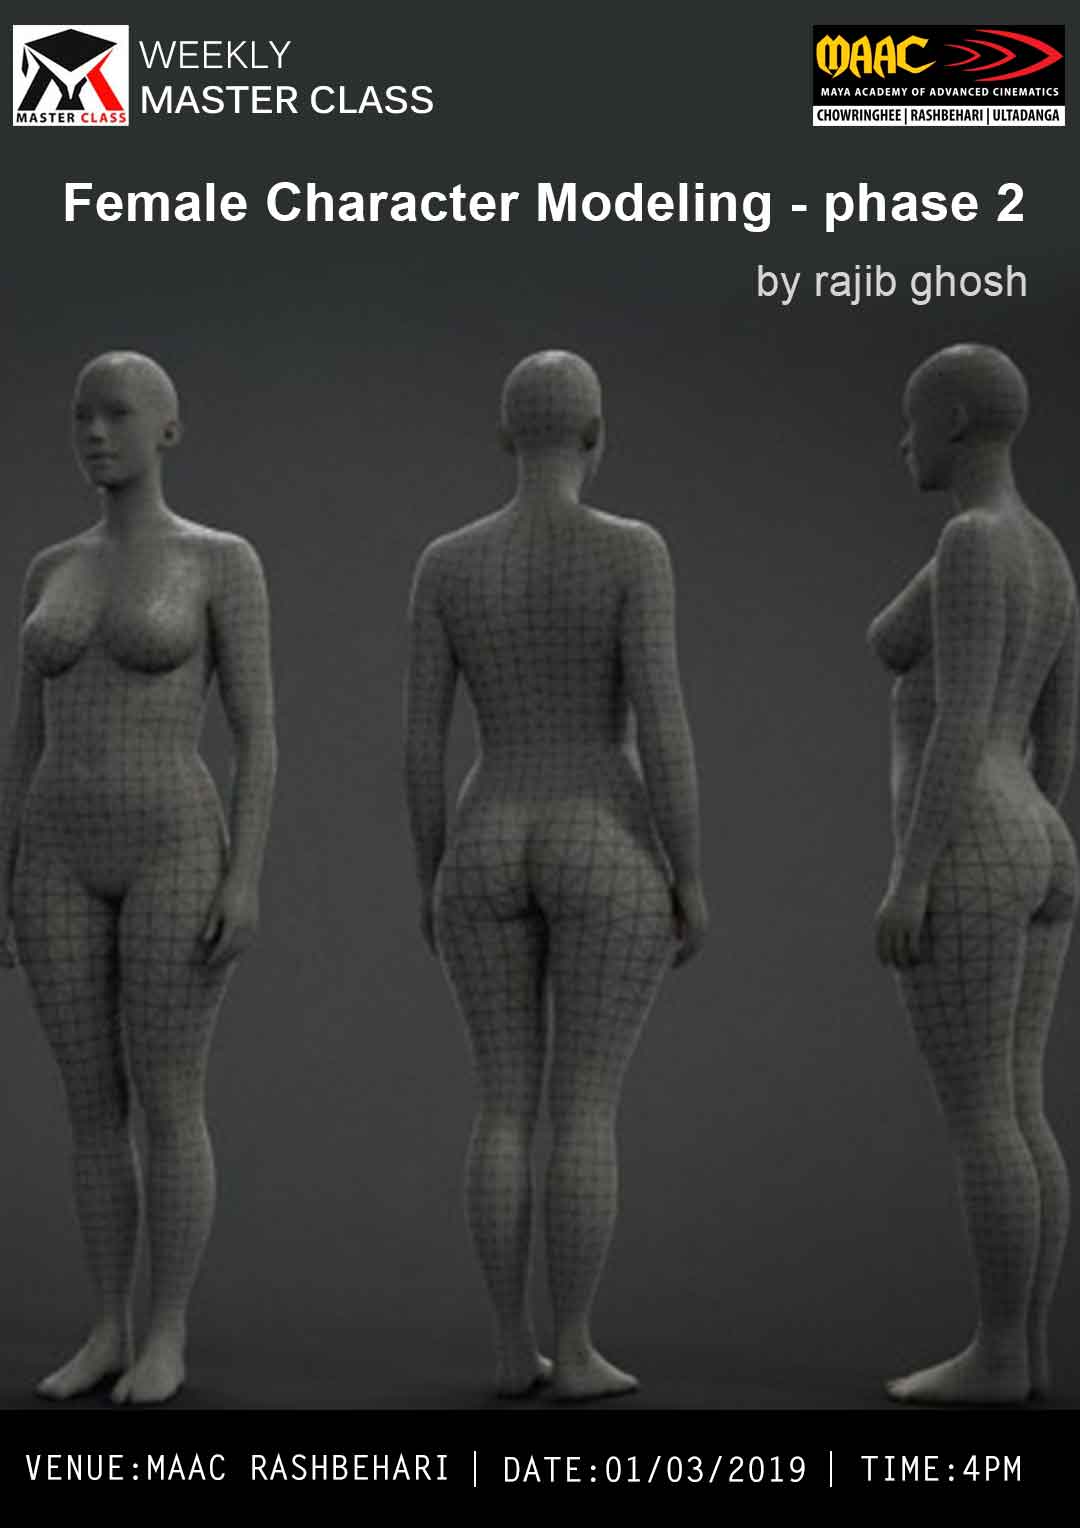 Weekly Master Class on Female Character Modeling Phase 2